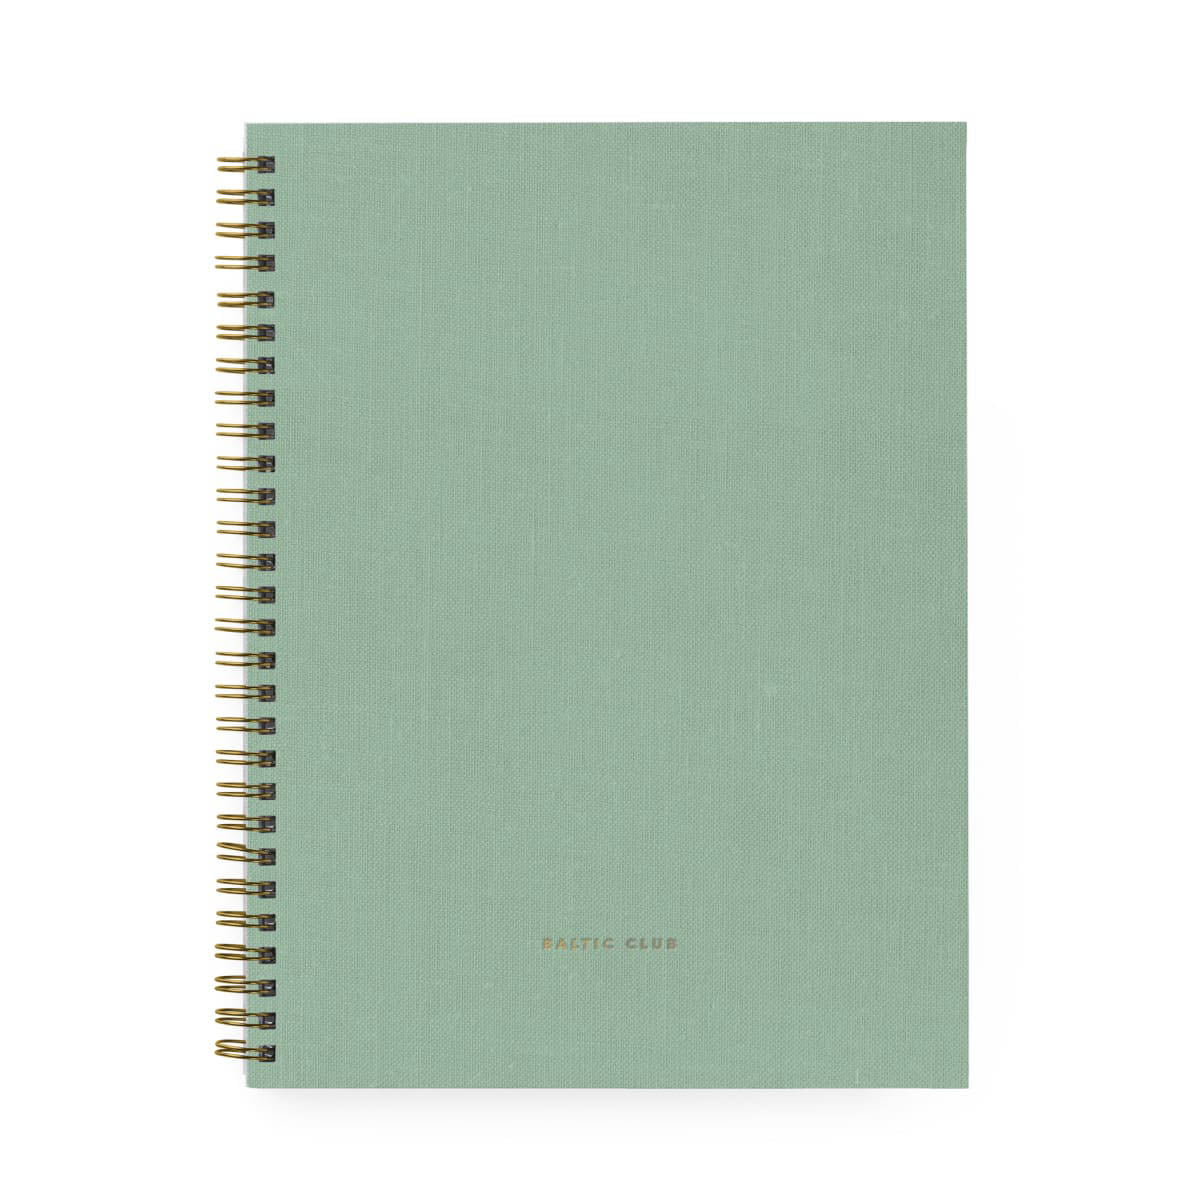 Baltic Club Large Spiral Notebook Mint Cloth - Lined